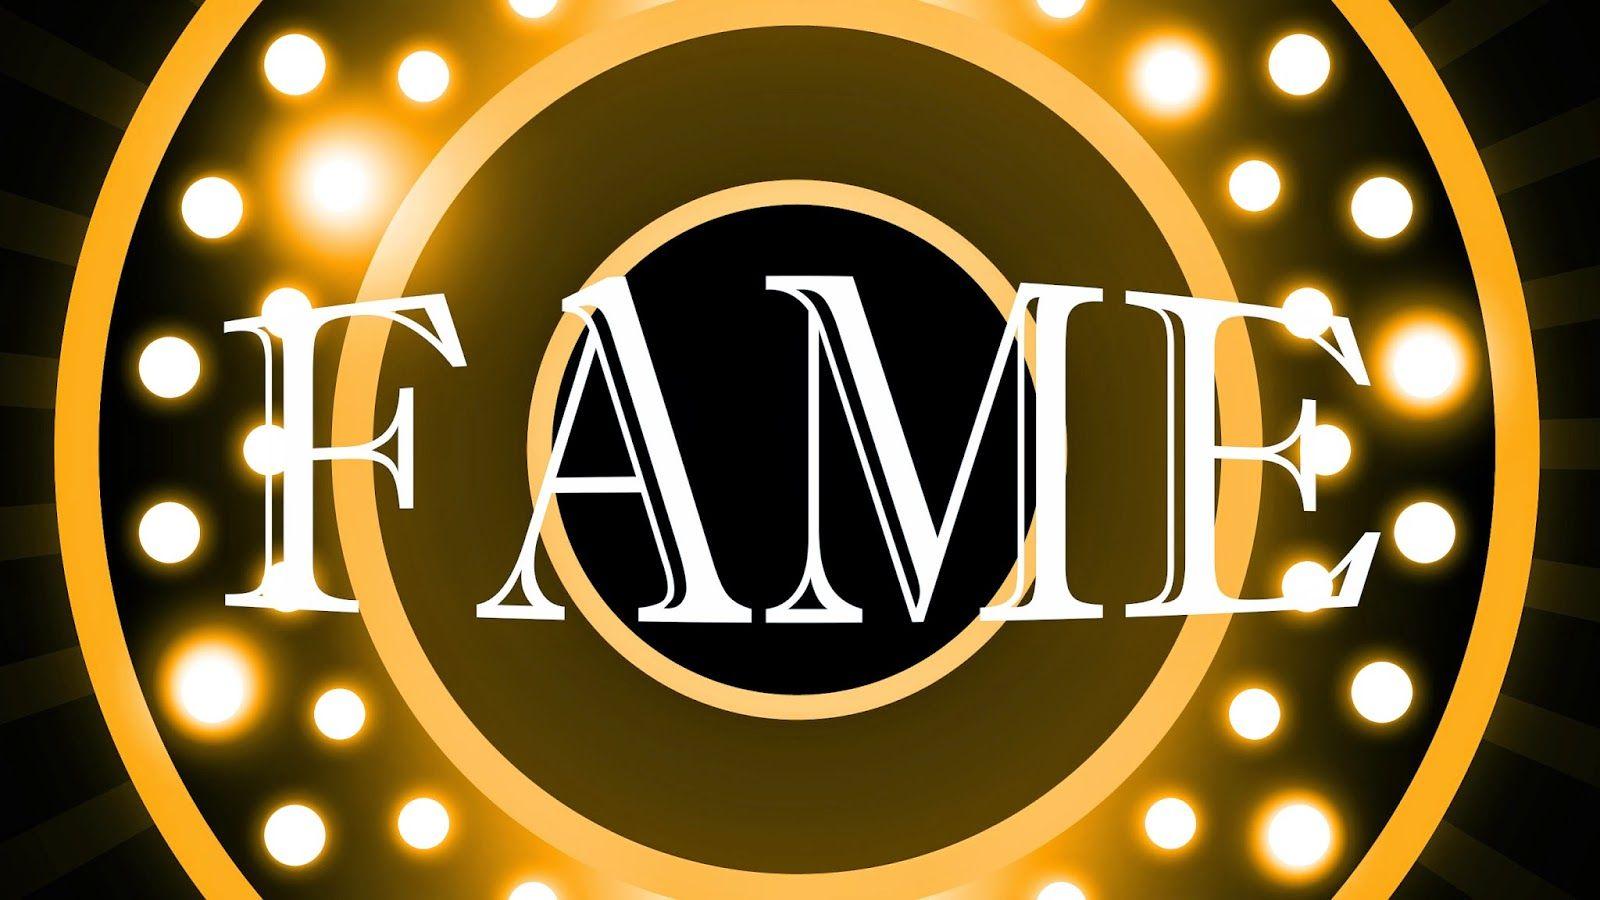 Famous People Logo - When Will You Become Famous?